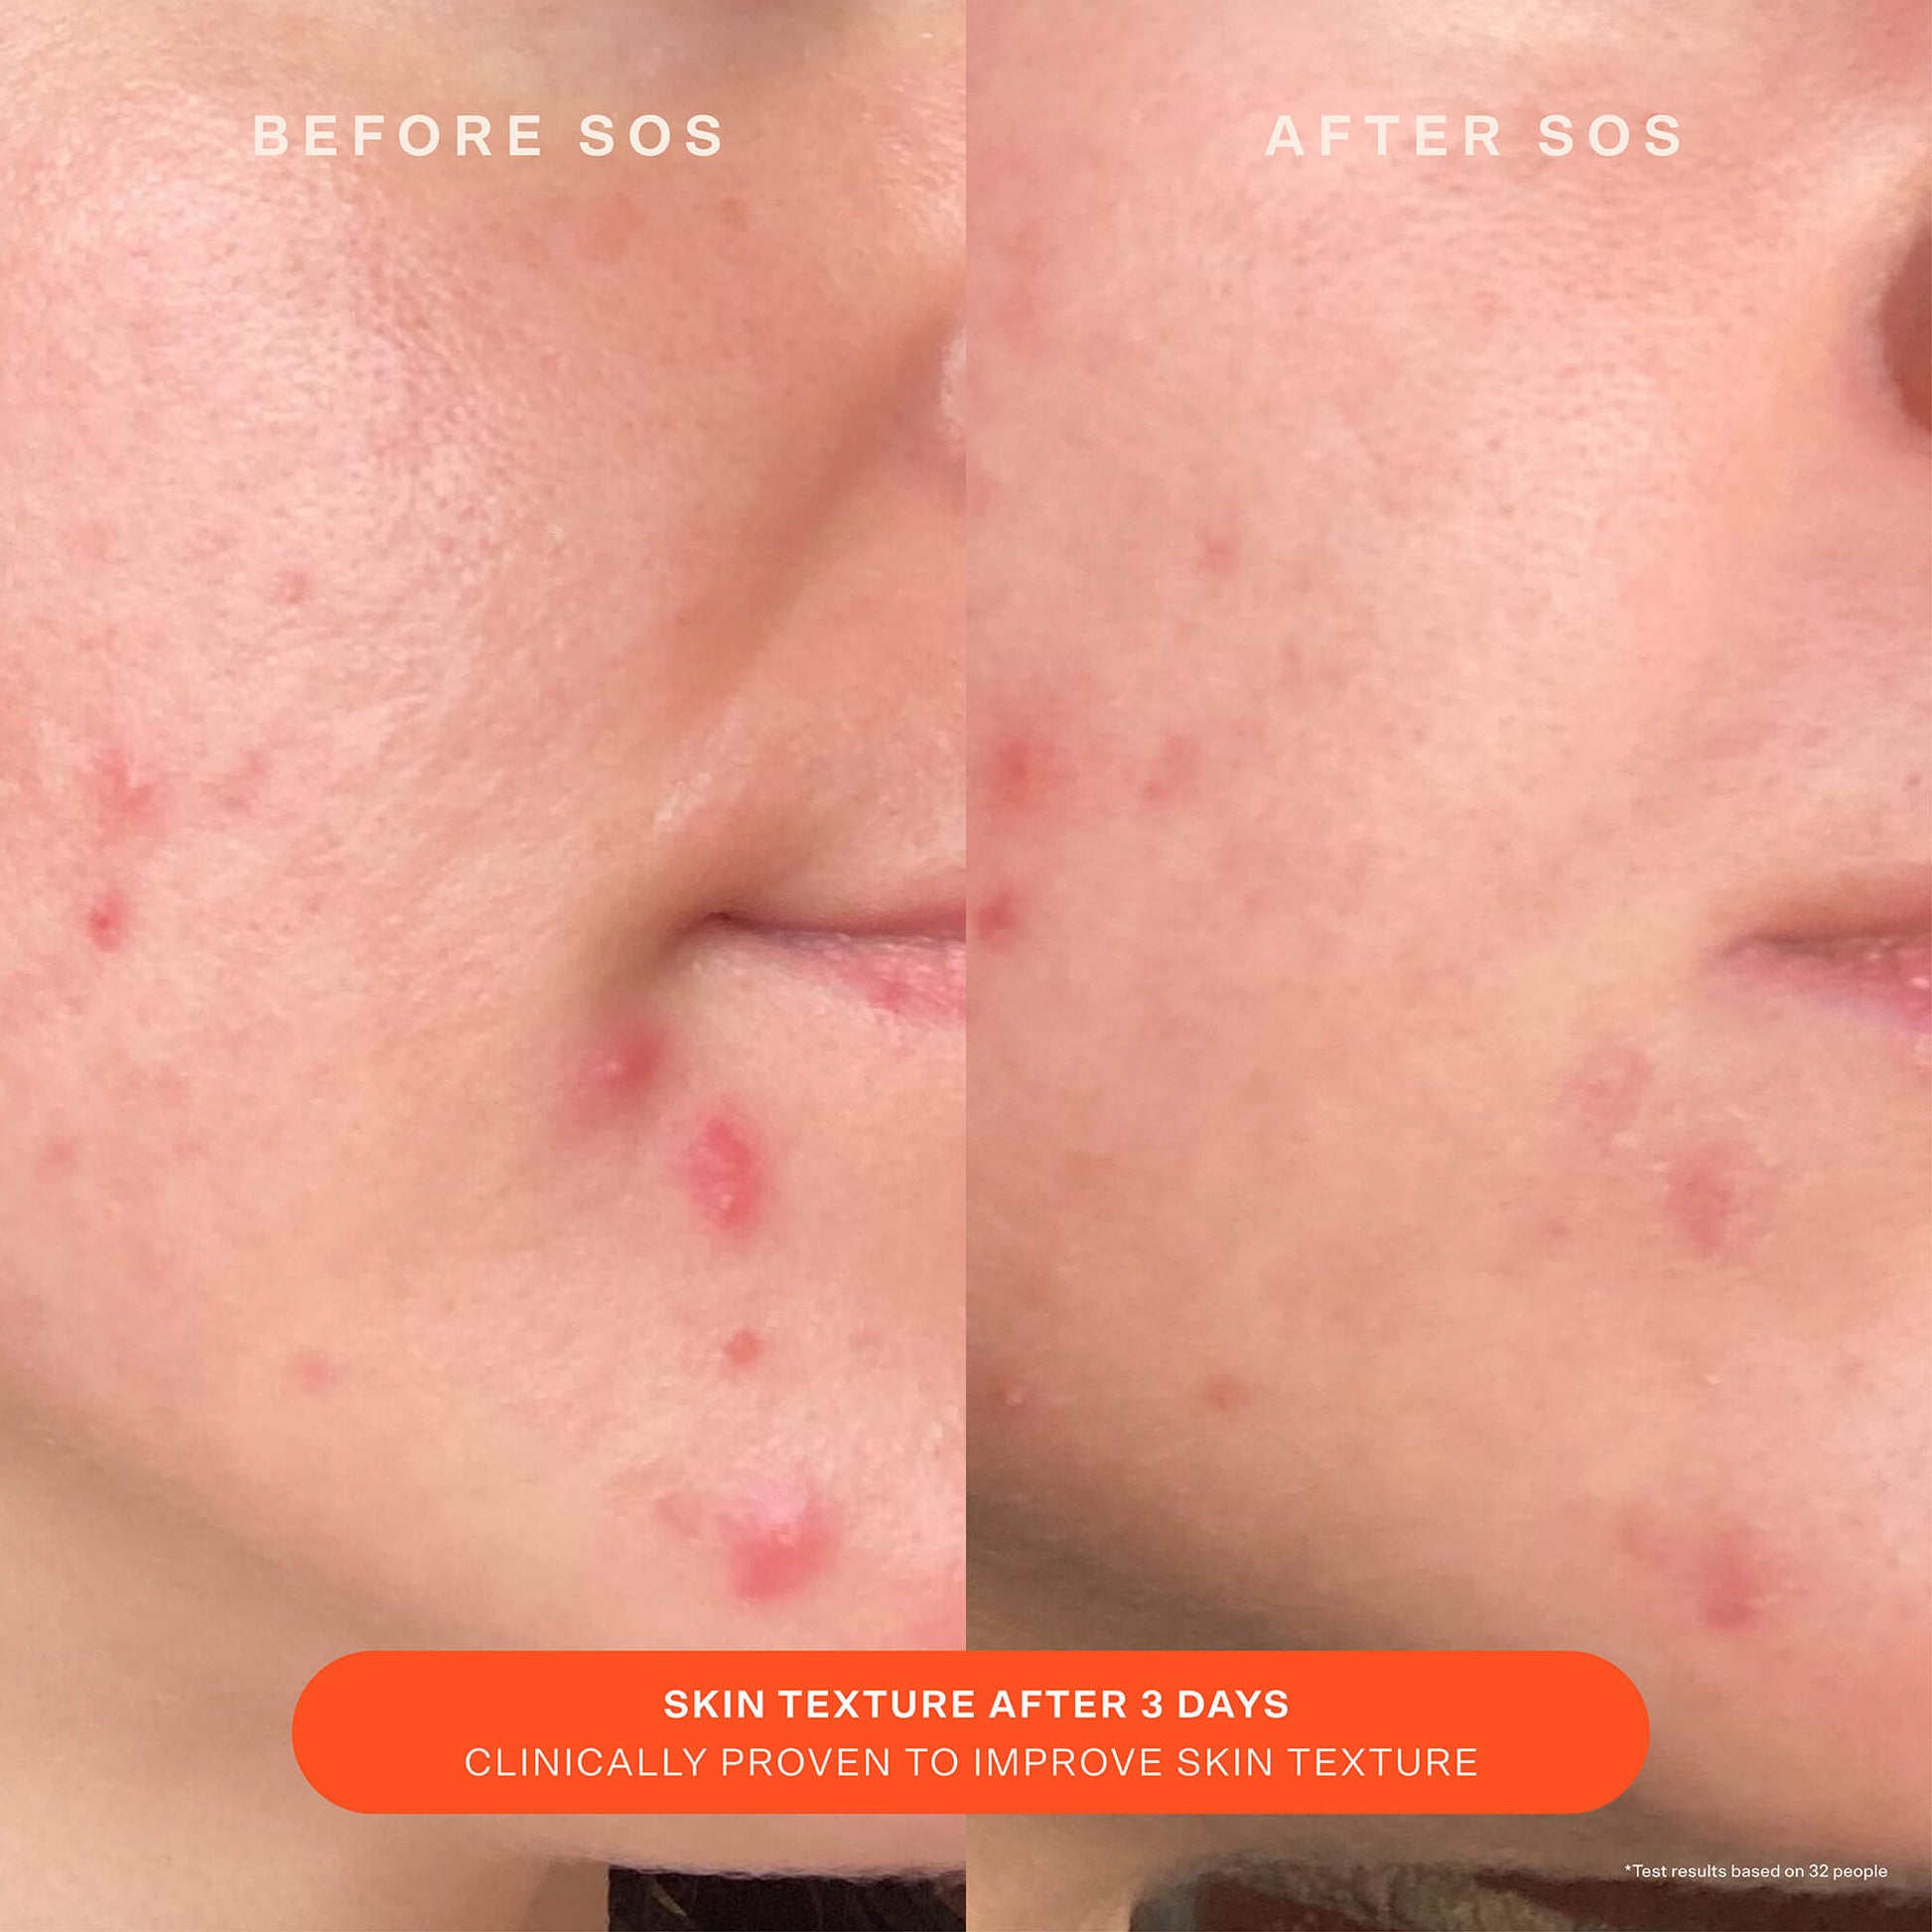 [Shared: A comparison before and after the use of Tower 28 Beauty SOS Recovery Cream. "Skin texture after 3 days. Clinically proven to improve skin texture"